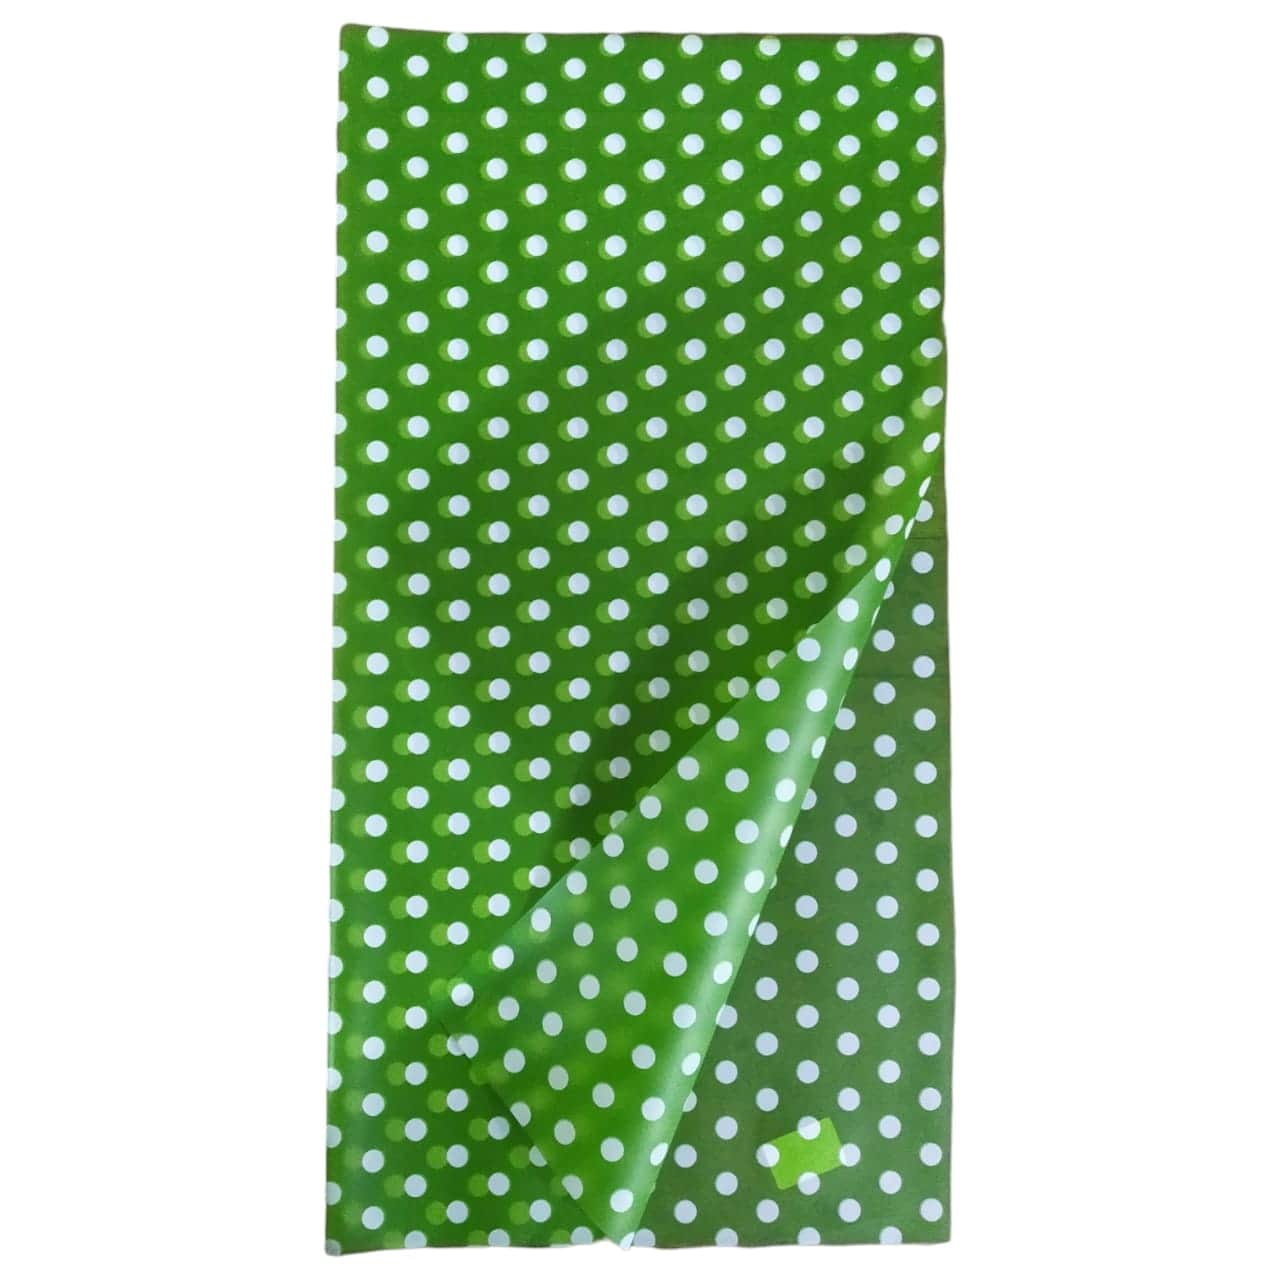 Ravrai Craft - Mumbai Branch Wrapping Paper GREEN Polka Dots Wrapping Paper - Plastic Material, 58x58cm, Pack of 1 Sheet